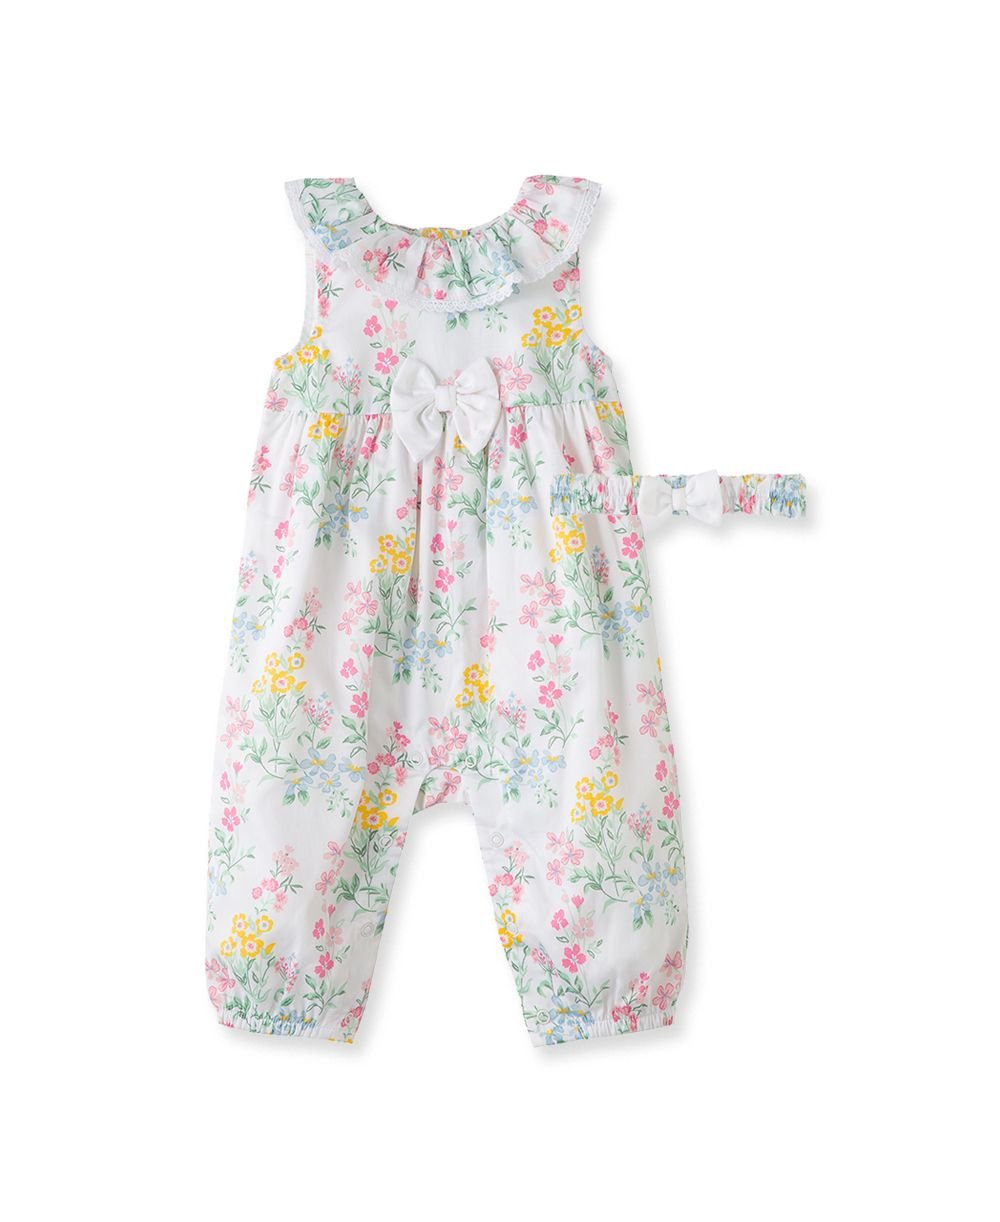 Scented Garden Coverall in Floral - shop-olivia.com